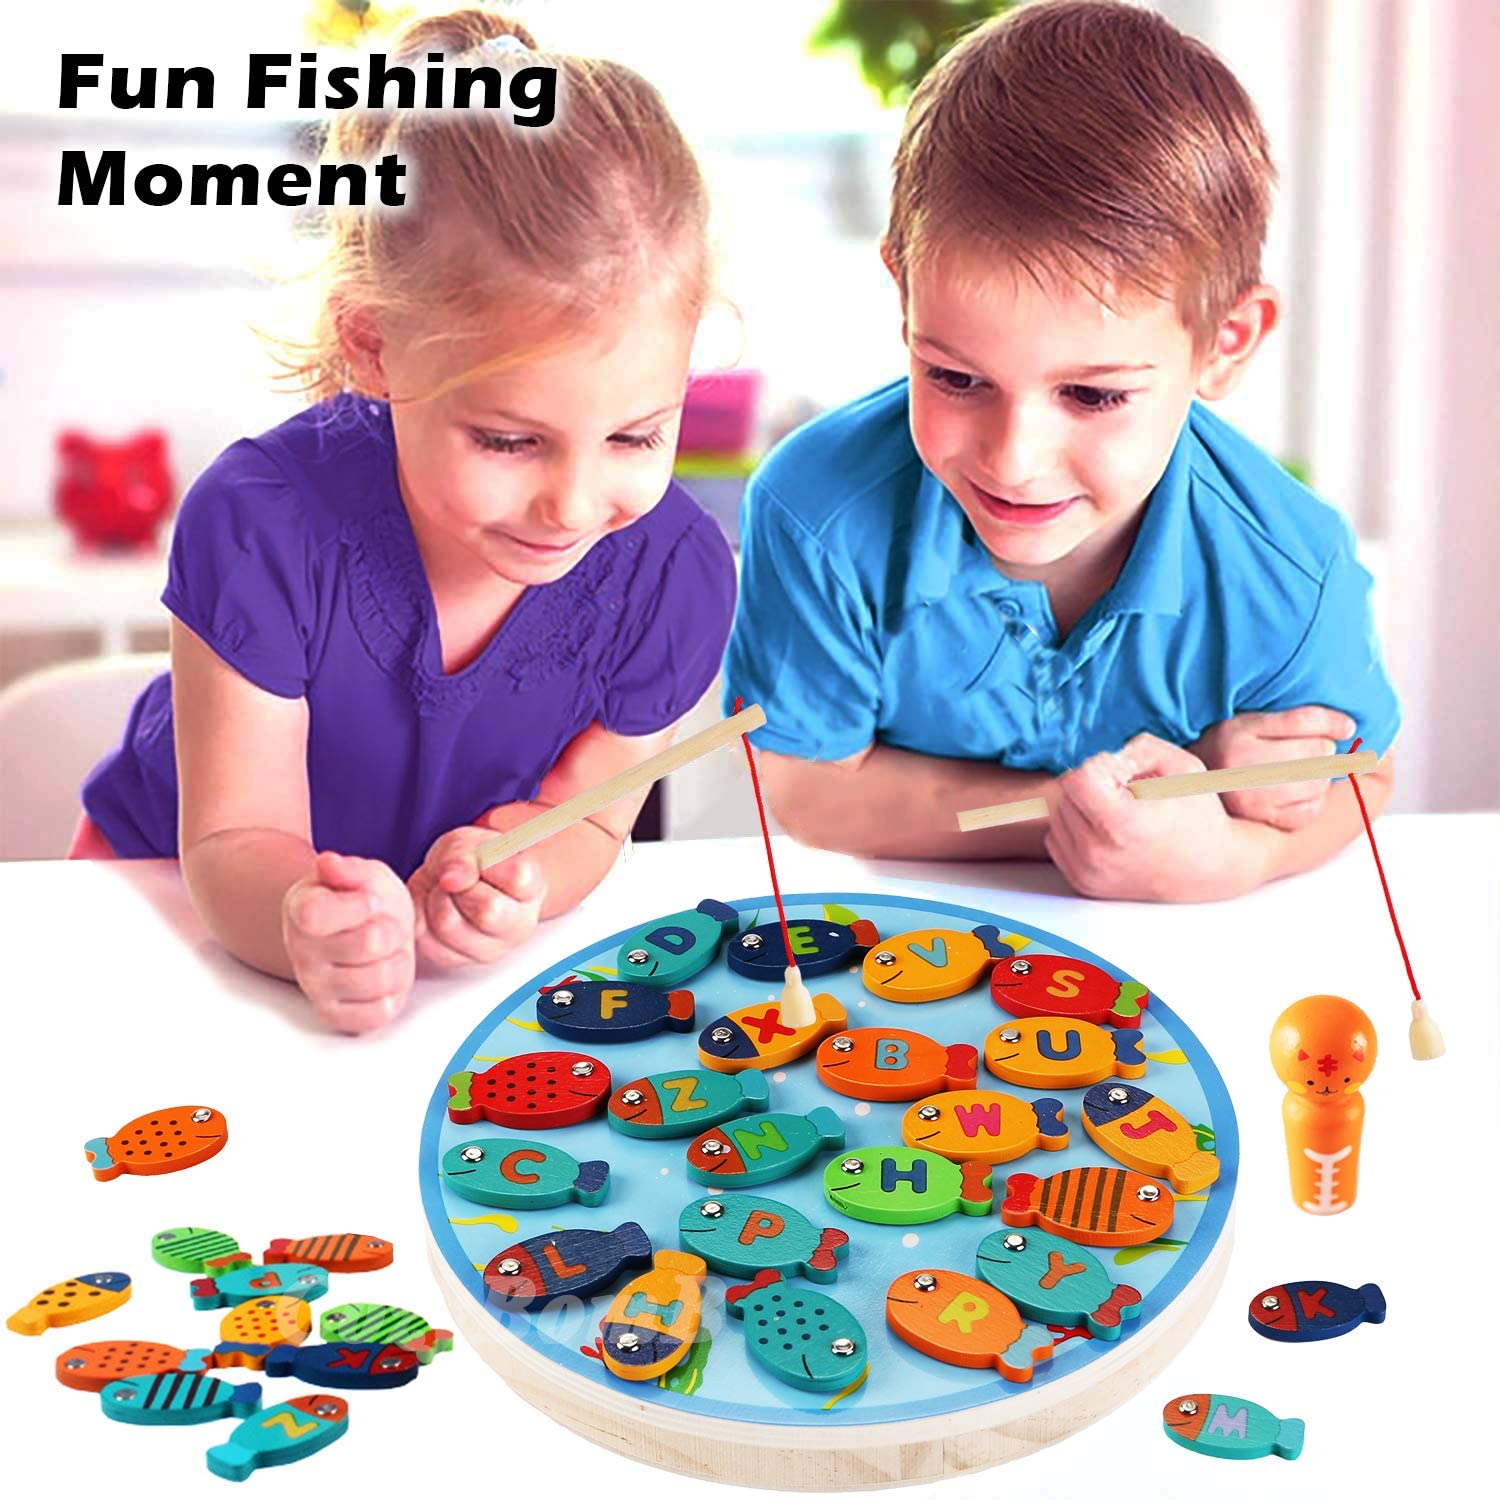 Wooden Fishing Toy with 10 Fish & 2 Fishing Pole Activity Party